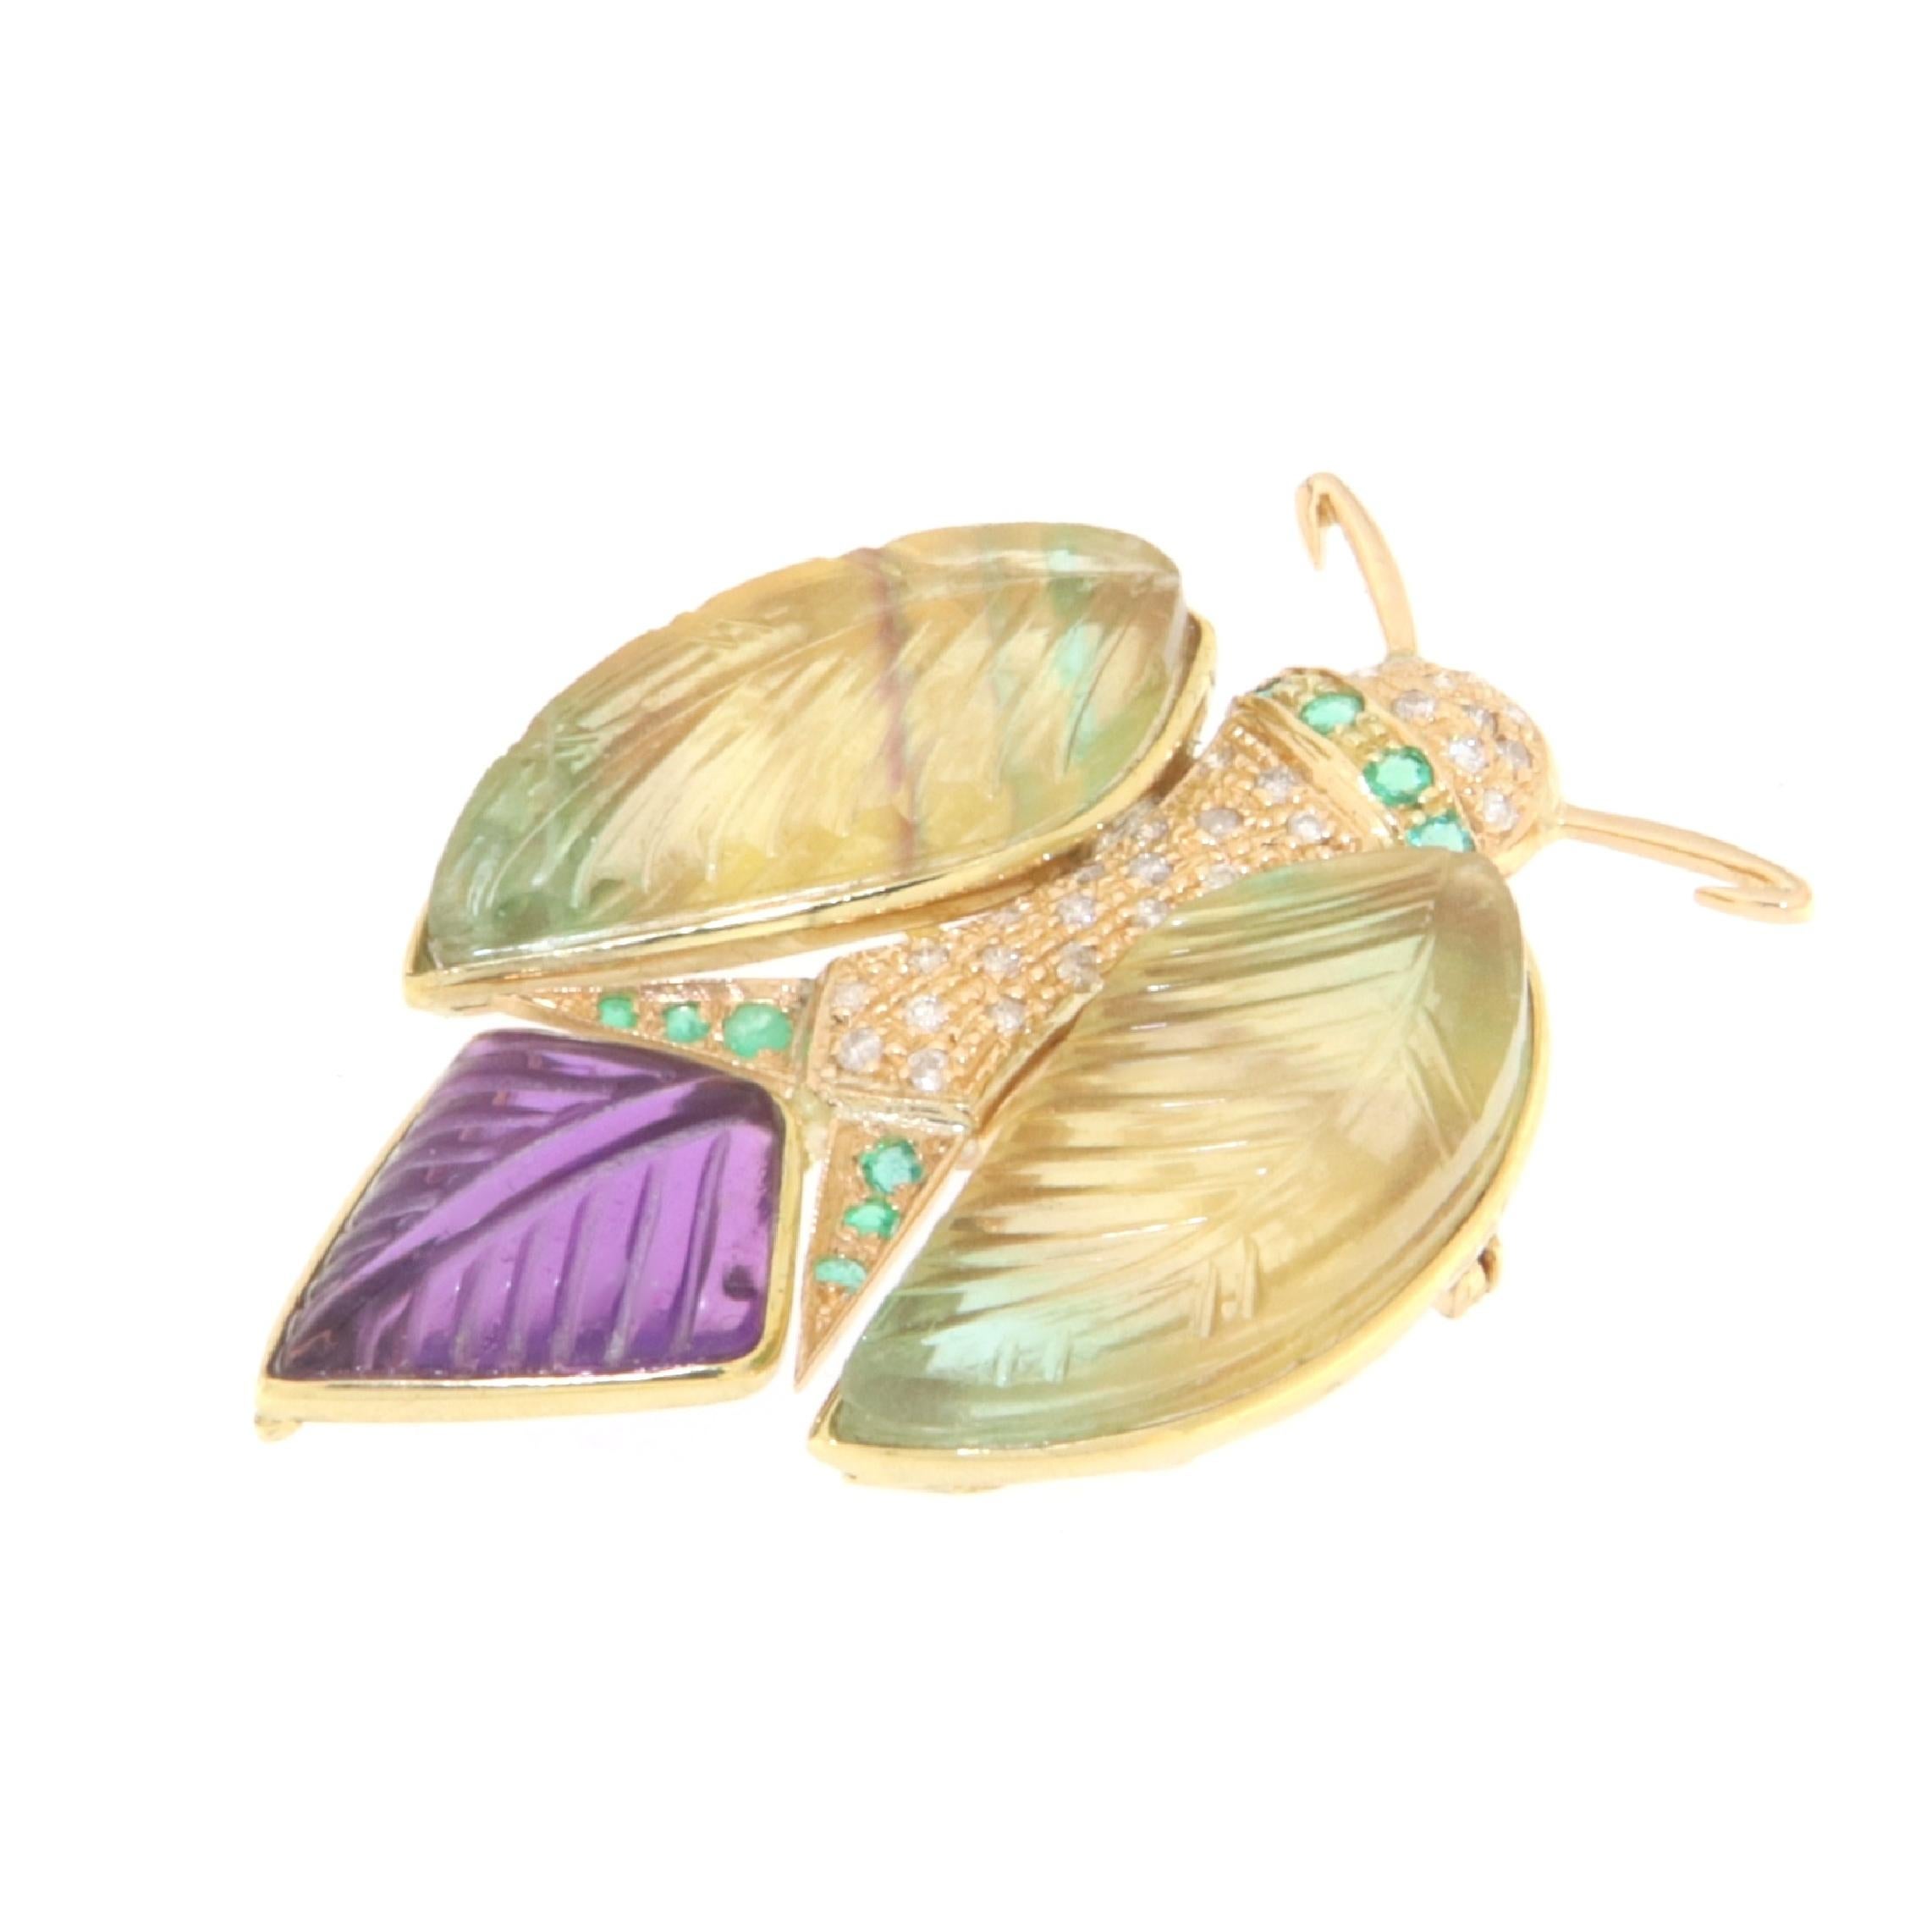 Graceful brooch depicting a butterfly with closed wings made of 18k yellow gold, on the small body is set with diamonds and emeralds, the wings are made up of two pairs of engraved citrines while the tail is an engraved  amethysts.

A jewel to wear